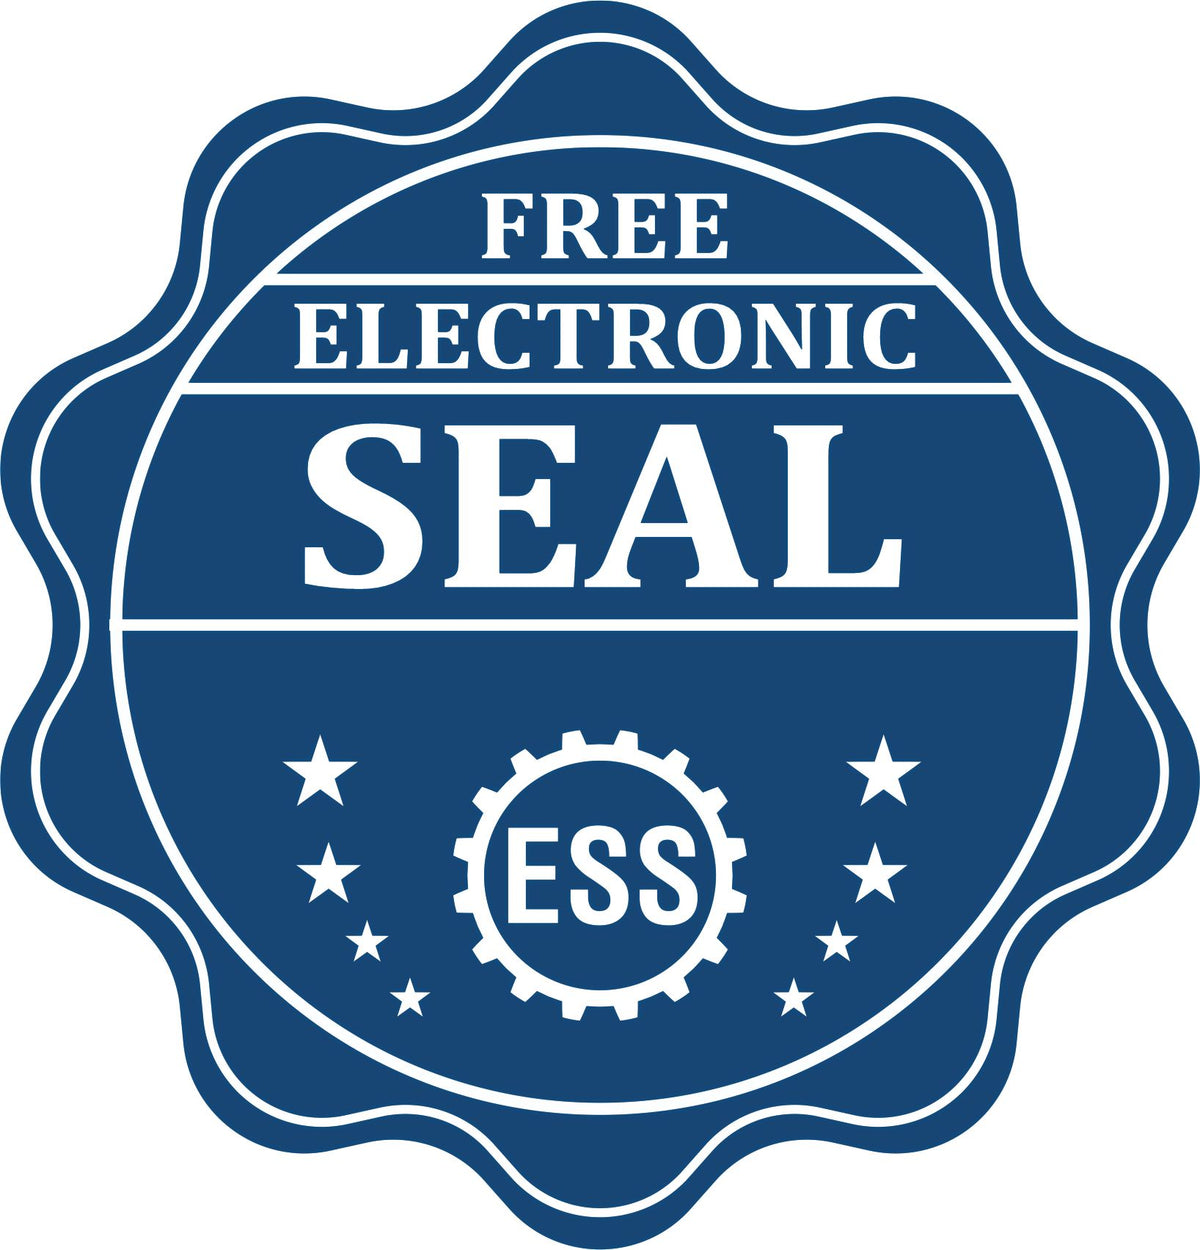 A badge showing a free electronic seal for the Hybrid District of Columbia Geologist Seal with stars and the ESS gear on the emblem.